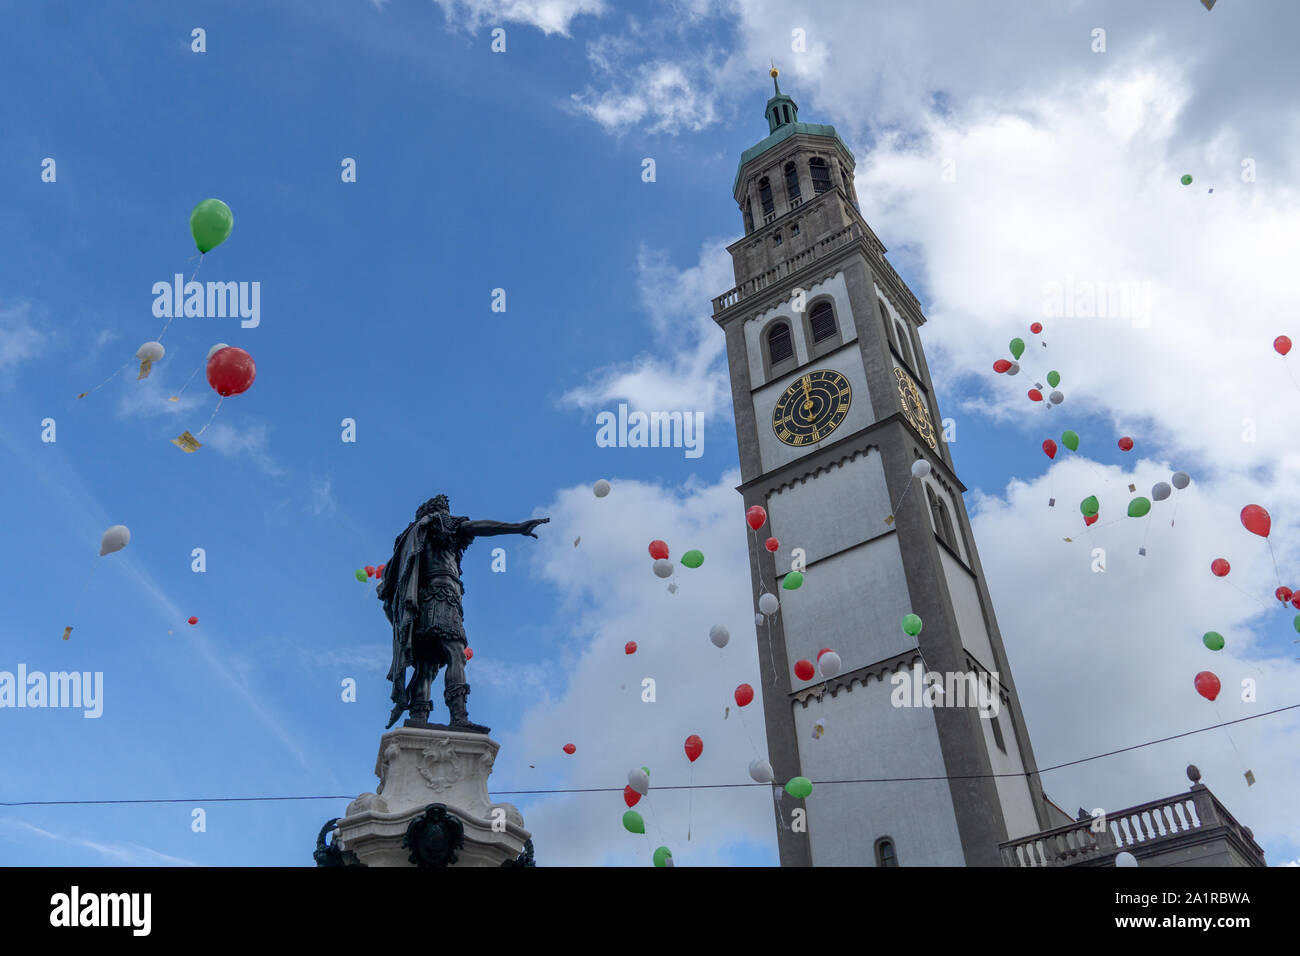 Turamichele celebration with ballons in front of Perlach tower in Augsburg, Germany, Bavaria Stock Photo